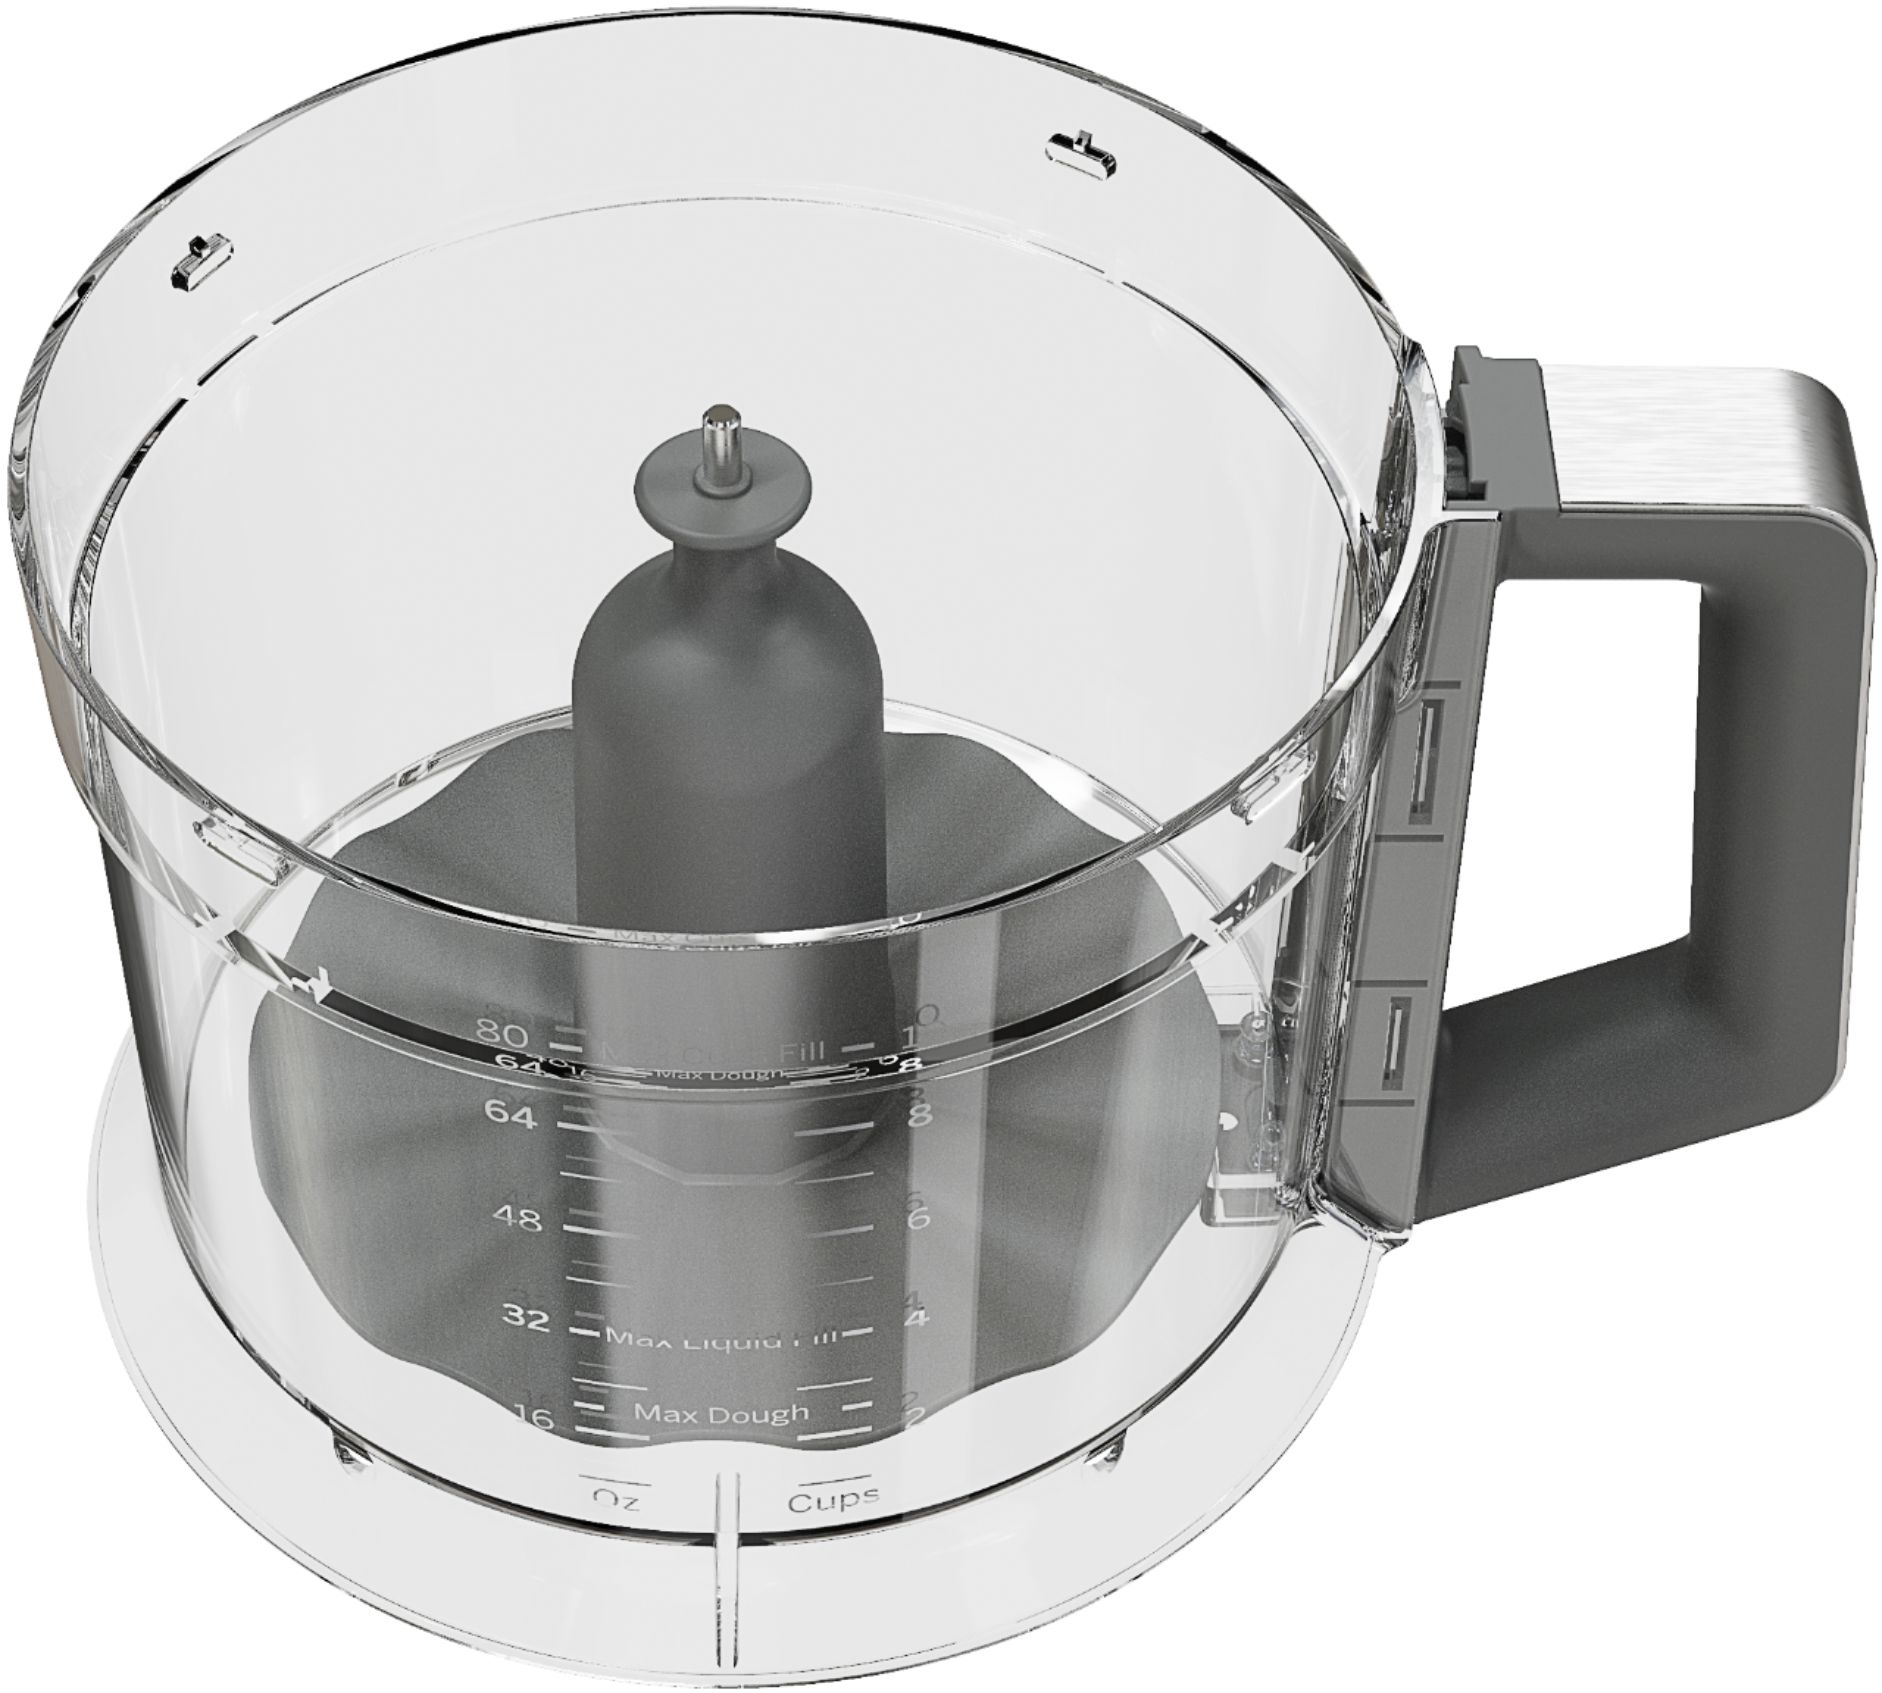 GE - 12-Cup Food Processor with Accessories - Stainless Steel